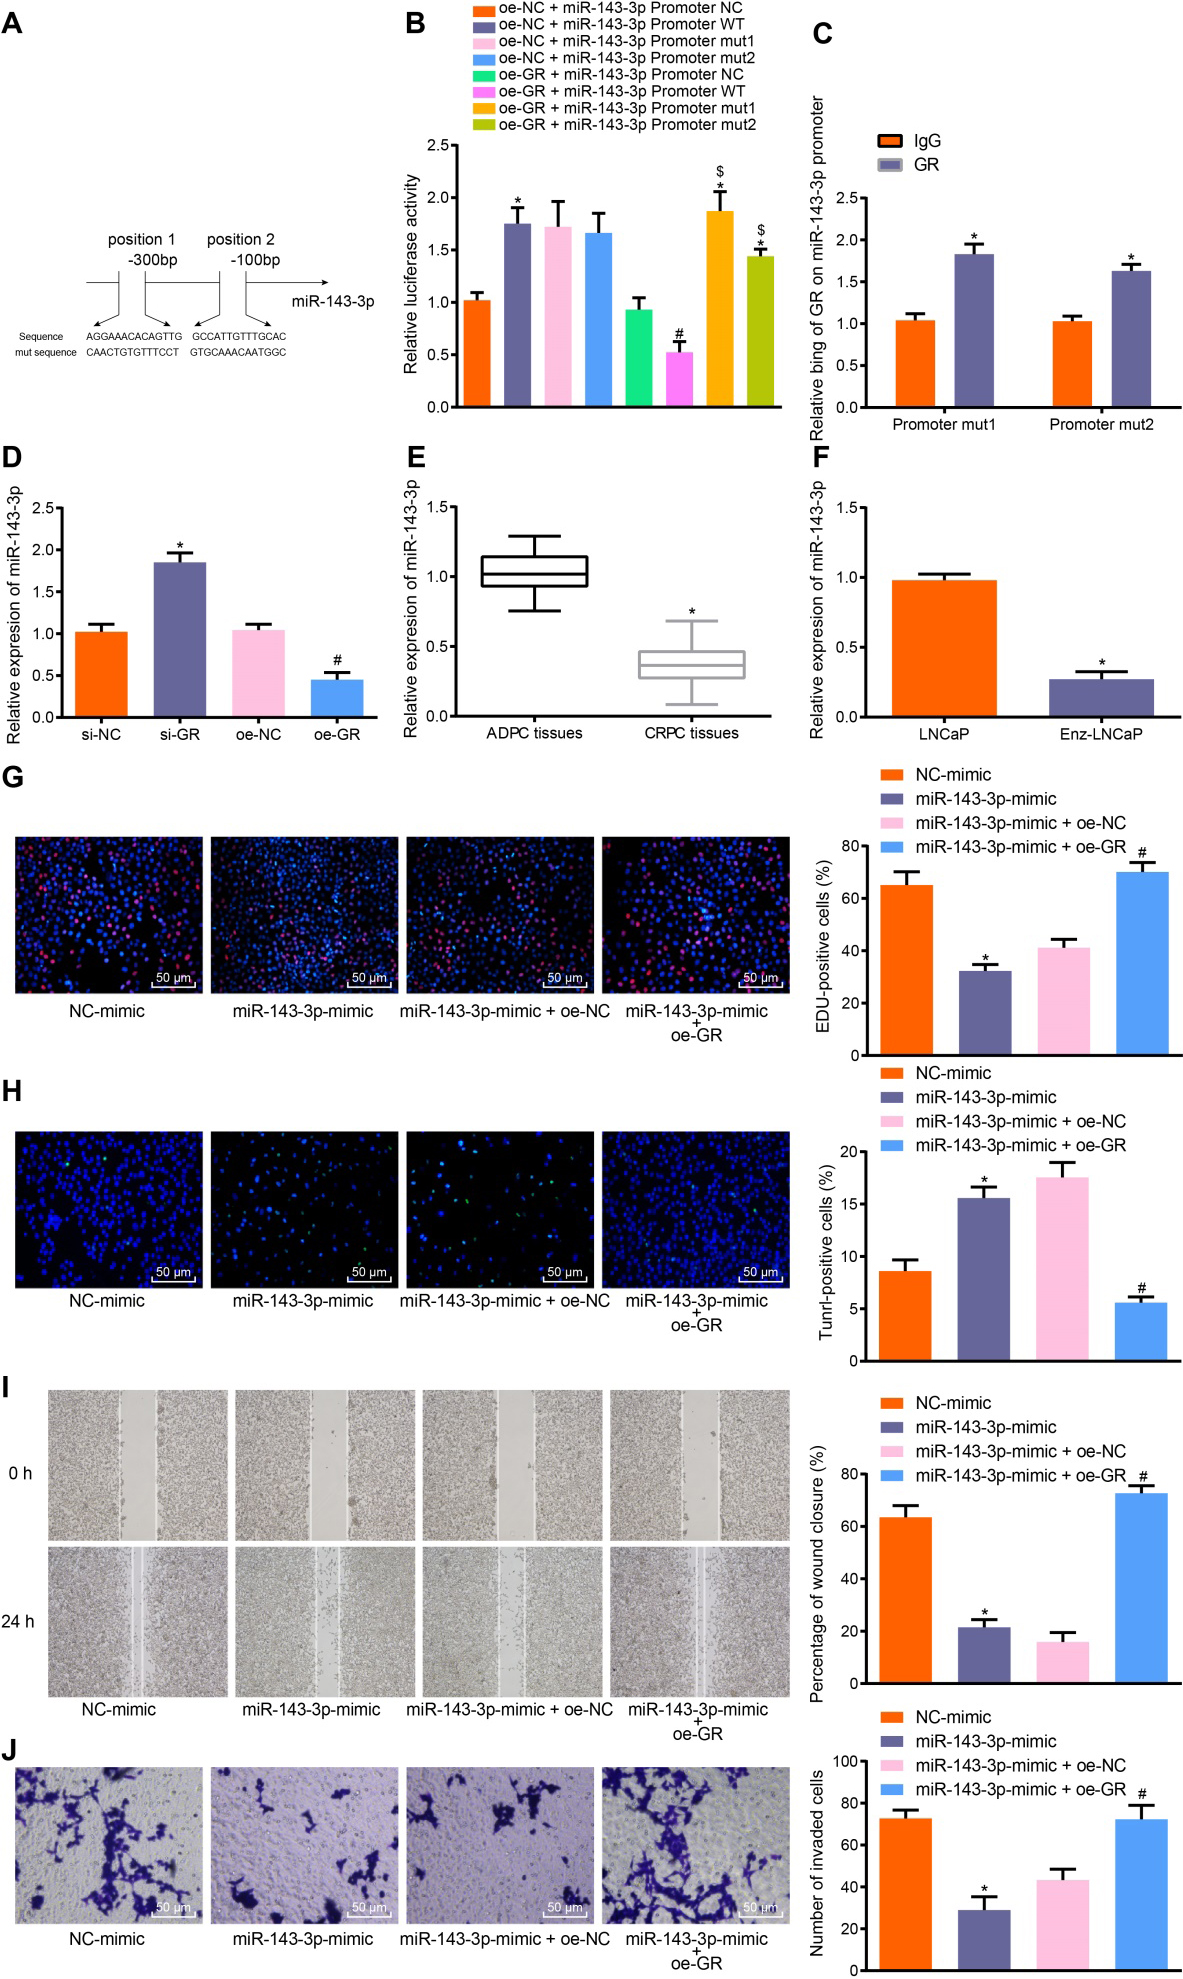 GR promotes the progression of CRPC in vitrovia suppression of miR-143-3p. A, The prediction of GR binding sites in miR-143-3p promoter and the mutation sequence produced by site mutations. B, The binding relationship between miR-143-3p and GR analyzed by dual-luciferase reporter assay, p*< 0.05 compared with the oe-NC + miR-143-3p Promoter NC group; p#< 0.05 compared with the oe-GR + miR-143-3p Promoter NC group; p$<0.05 compared with the oe-GR + miR-143-3p Promoter WT group. C, The enrichment of GR in miR-143-3p promoter detected by ChIP assay. p*< 0.05 compared with the IgG group. D, The expression of miR-143-3p after GR silencing or overexpression determined by RT-qPCR, p*< 0.05 compared with cells treated with si-NC; p#< 0.05 compared with cells treated with oe-NC. E, The expression of miR-143-3p in CRPC and ADPC tissues determined by RT-qPCR, p*< 0.05 compared with ADPC tissues. F. The expression of miR-143-3p in LNCaP and Enz-LNCaP cells determined by RT-qPCR, p*< 0.05 compared with LNCaP cells. G, Detection of cell proliferation by EdU assay, (200 ×, scale 50 μm), p*< 0.05 compared with cells treated with NC-mimic; p#< 0.05 compared with cells treated with miR-143-3p mimic and oe-NC. H, Detection of apoptosis by TUNEL assay (200 ×, scale 50 μm). p*< 0.05 compared with the NC-mimic group, p#< 0.05 compared with the miR-143-3p mimic + oe-NC group. I, The cell migration ability detected by wound healing assay. p*< 0.05 compared with the NC-mimic group; p#< 0.05 compared with the miR-143-3p mimic + oe-NC group. J, The invasive ability of cells detected by Transwell assay (200 ×, scale 50 μm), p*< 0.05 compared with the NC-mimic group, p#< 0.05 compared with the miR-143-3p-mimic + oe-NC group. Measurement data were expressed as mean ± standard deviation. Paired t-test (n= 8) was used to compare the data of the two groups of paired designs that followed normal distribution and homogeneity of variance, and the unpaired t-test was used to compare the data of the two groups of unpaired designs that followed normal distribution and homogeneity of variance. Data among multiple groups were analyzed by one-way ANOVA, followed by Tukey’s post hoc test. The cell experiment was repeated three times independently.